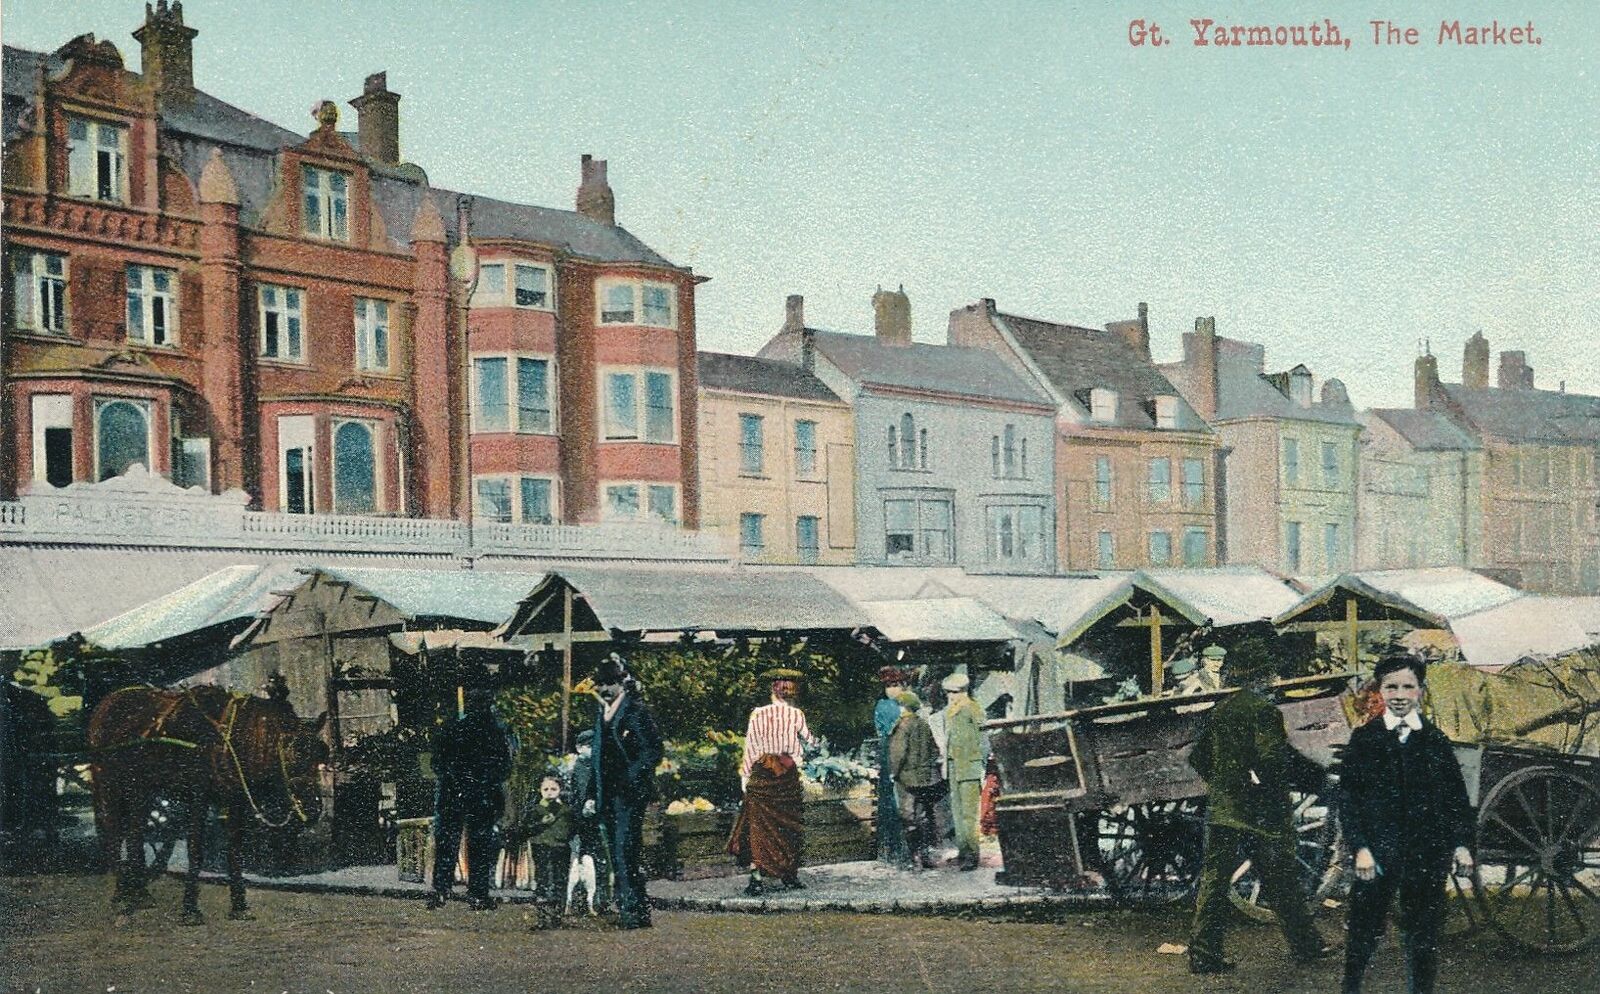 GREAT YARMOUTH - The Market - Norfolk - England